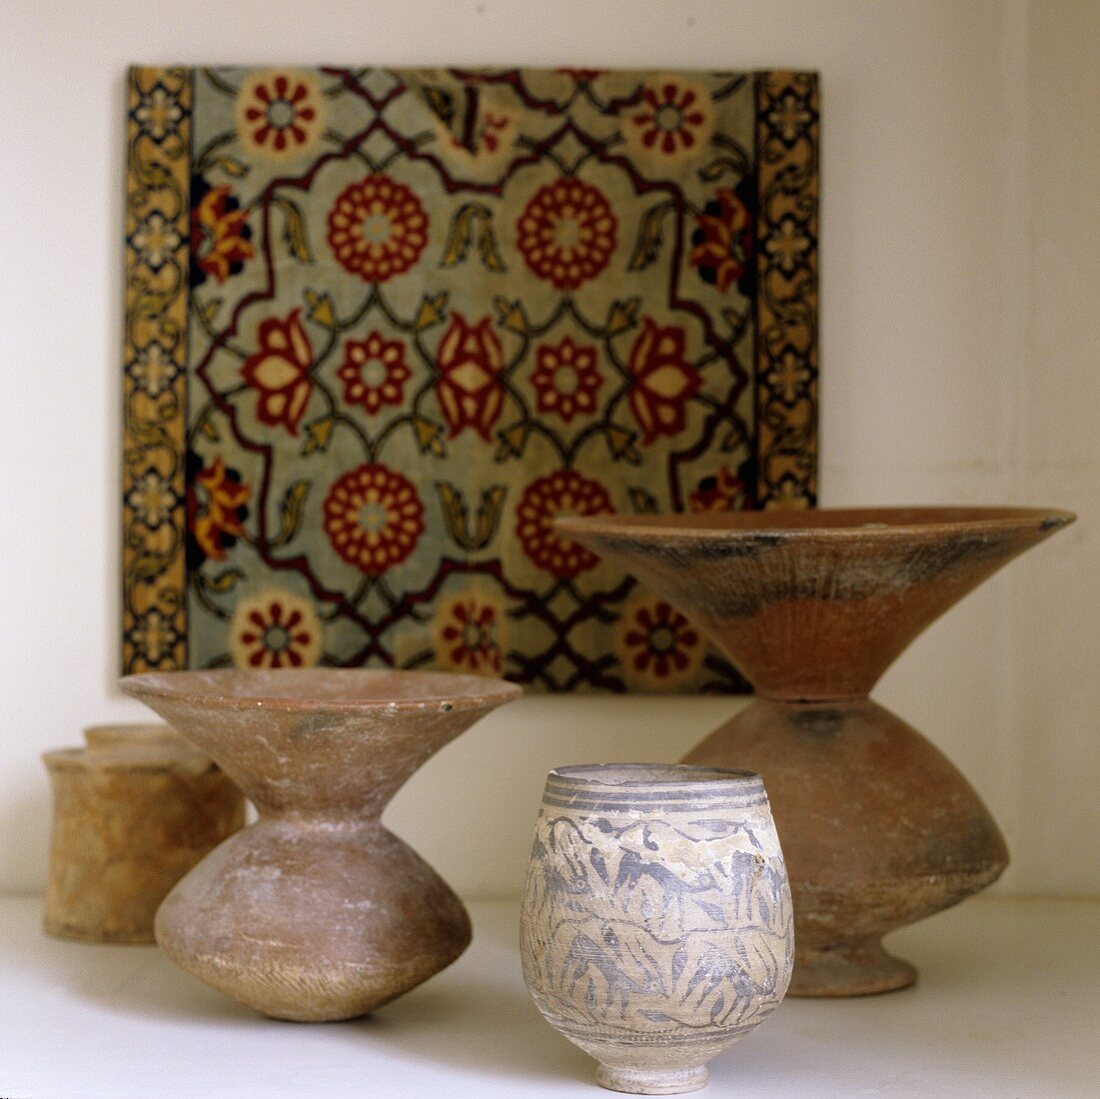 Antique folk art style stone containers in front of a picture with an oriental design